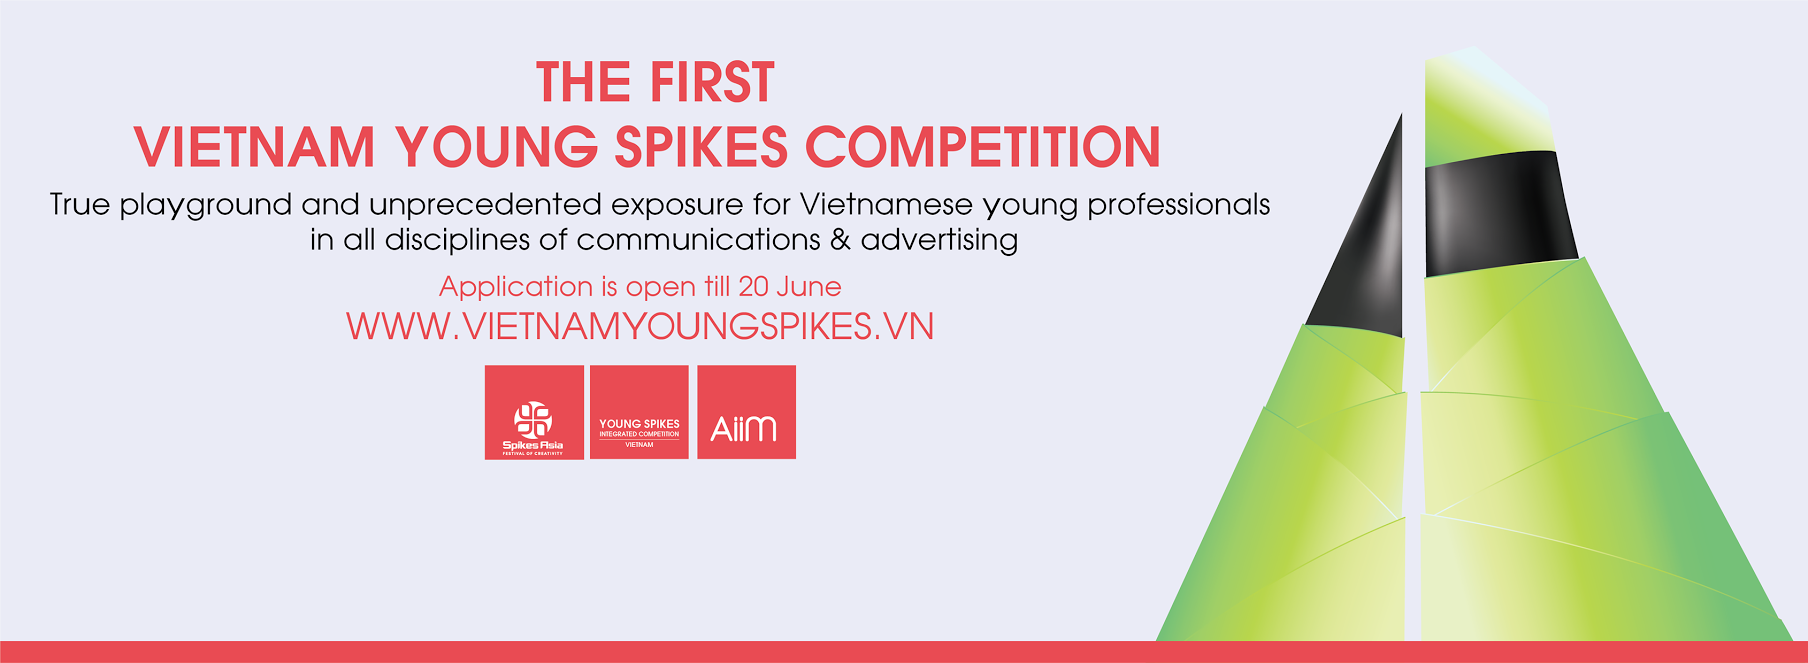 rgb_vn_viet_nam_young_spikes_competition